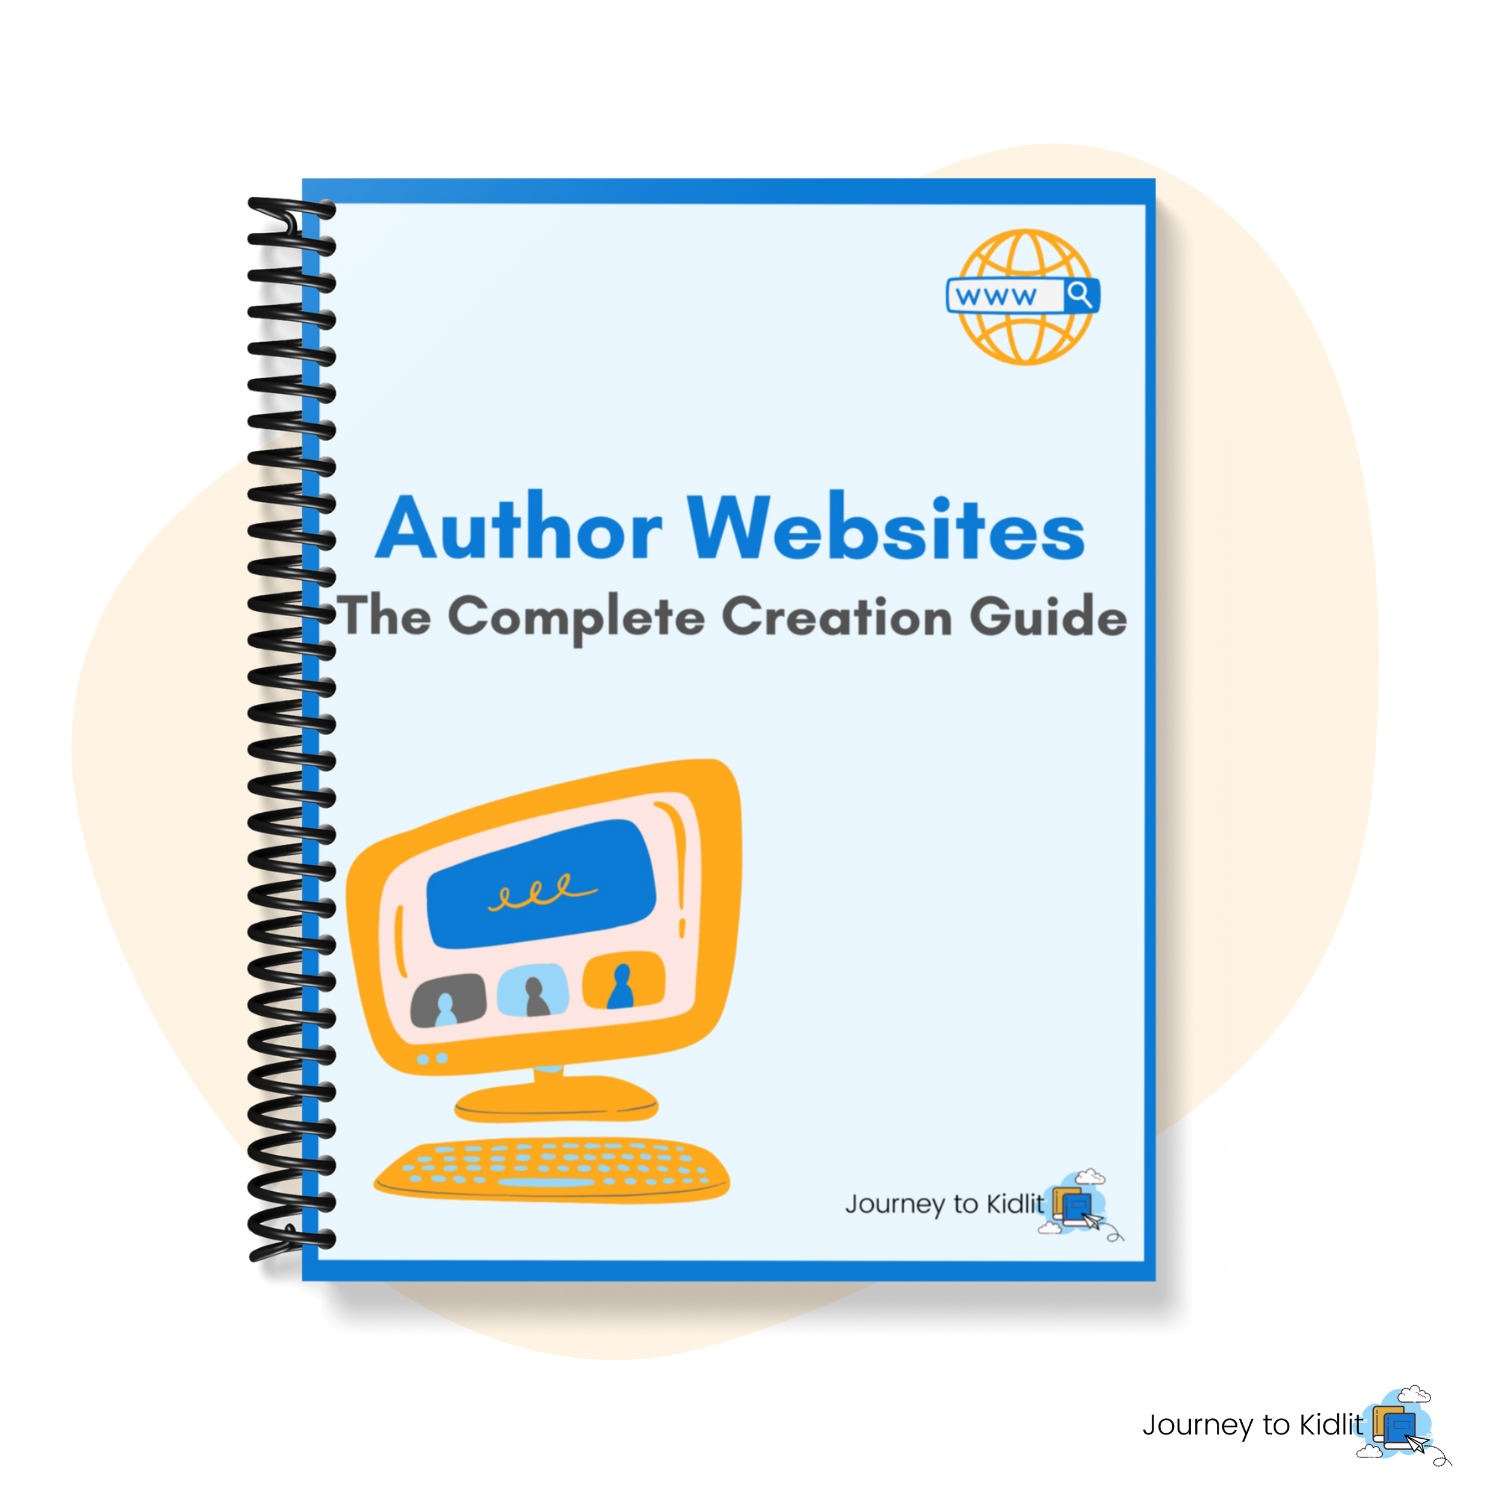 How to Create an Author Website | The Complete Guide